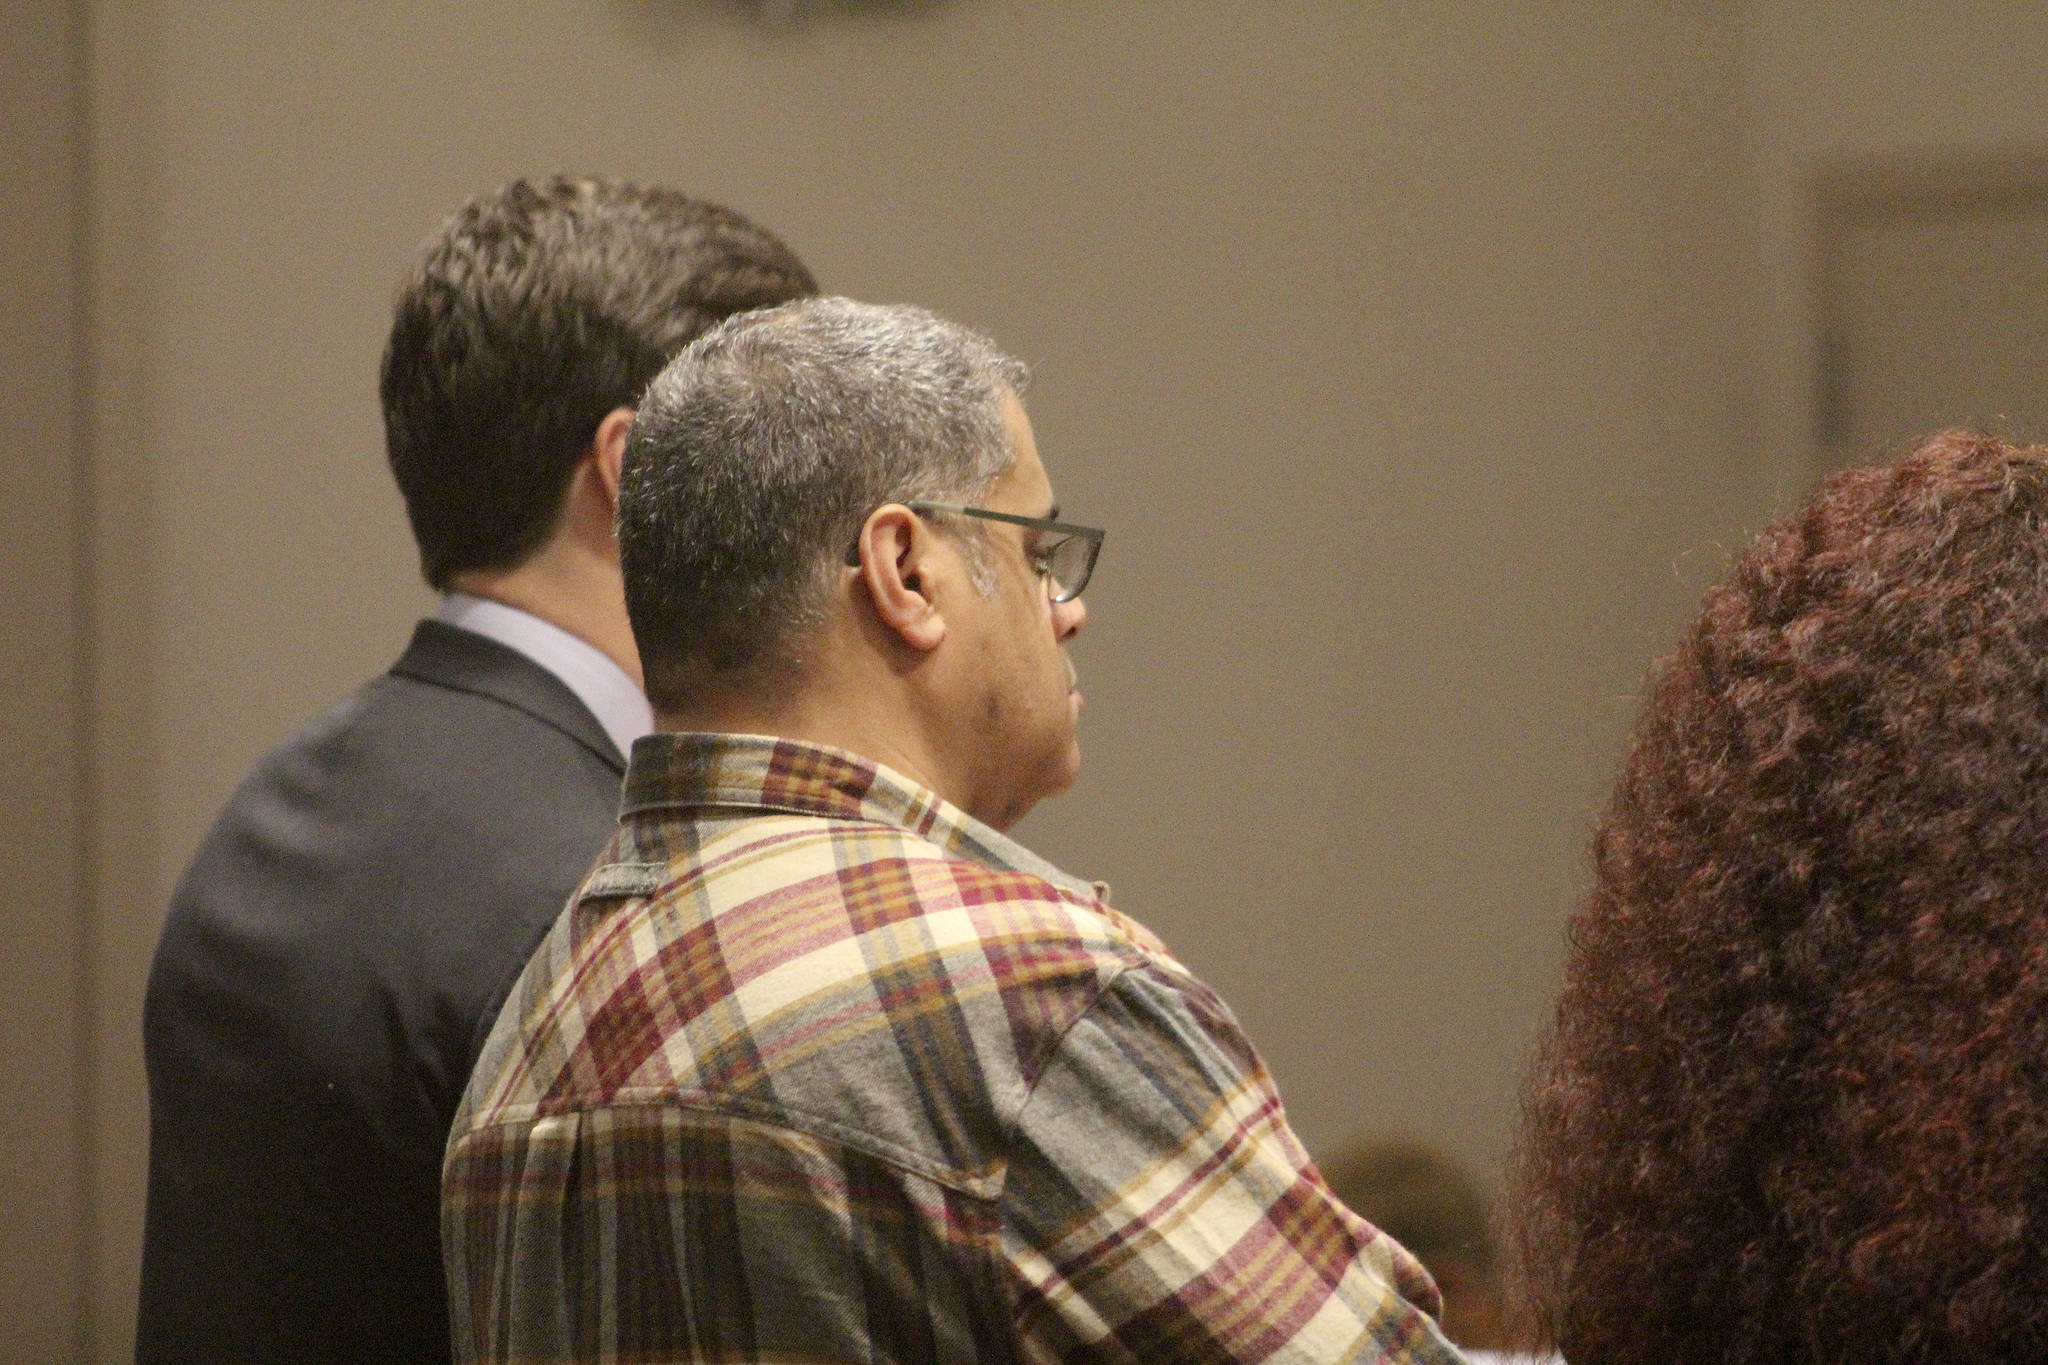 Mark David Glenn, 51, pleads not guilty to charges of child rape and sexual misconduct involving three Todd Beamer High School students on Jan. 23. OLIVIA SULLIVAN, Federal Way Mirror